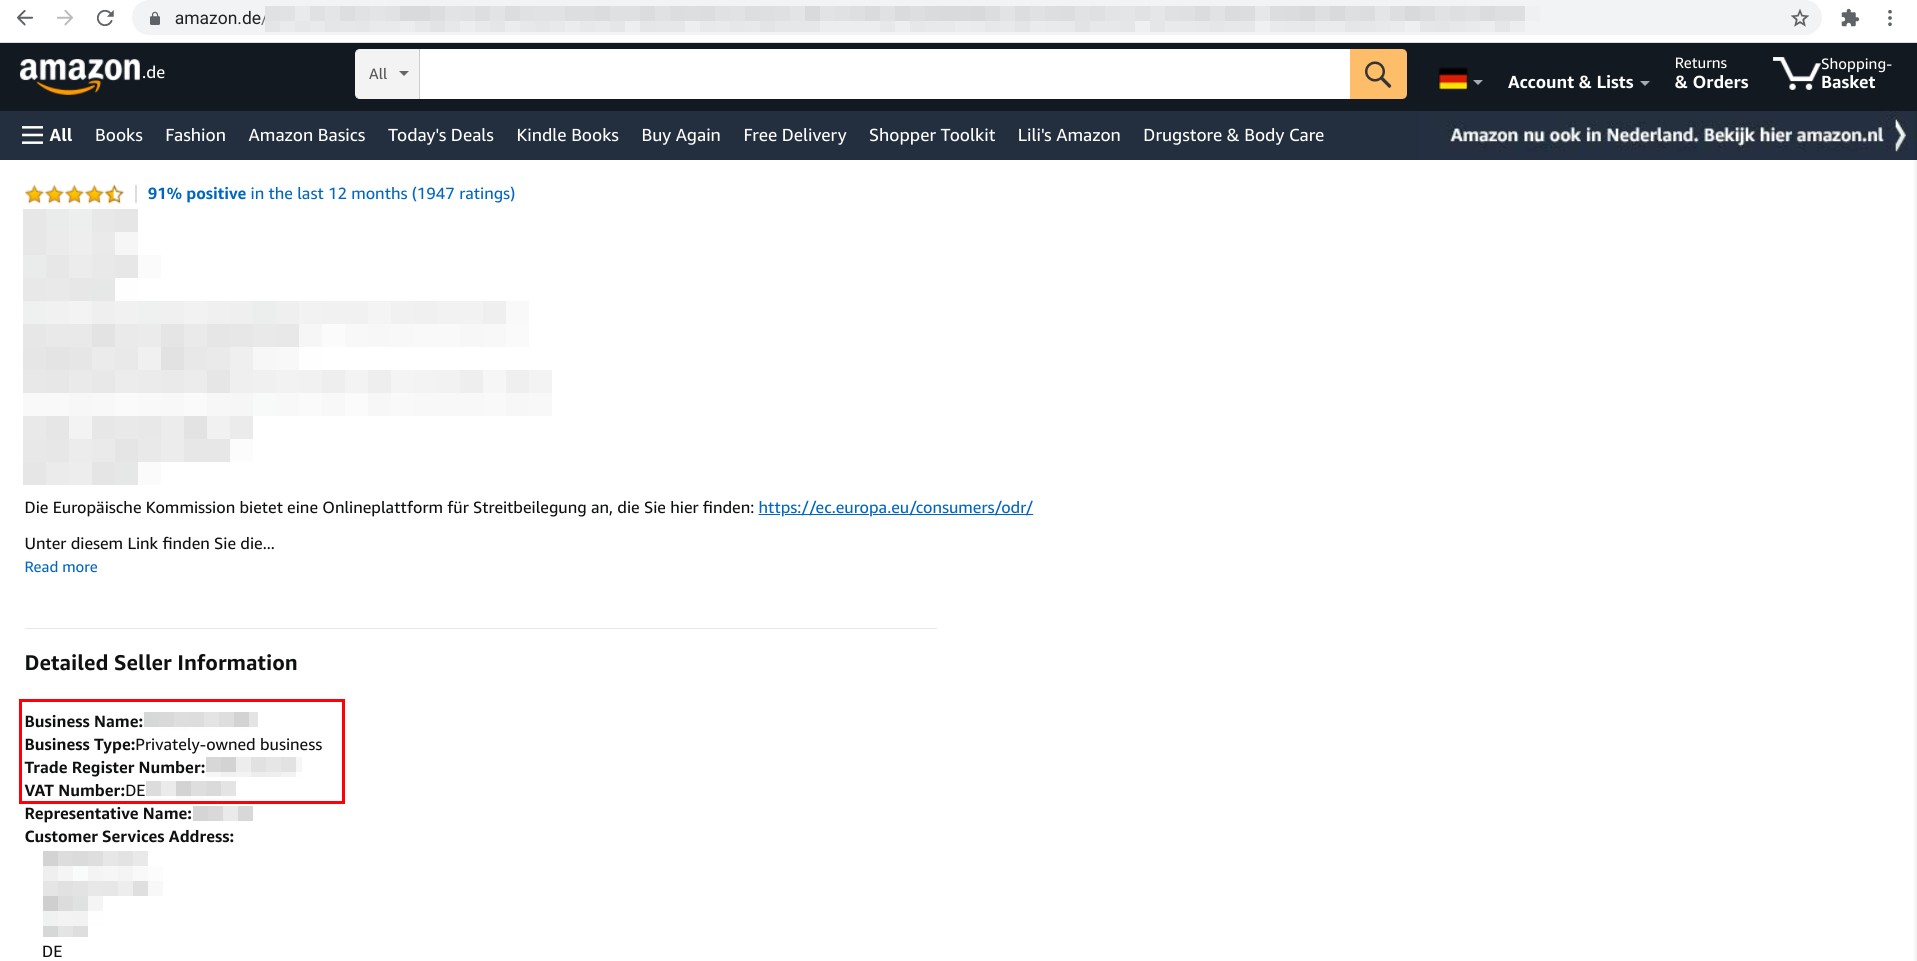 Screenshot of a “Detailed Seller Information” section on Amazon.de